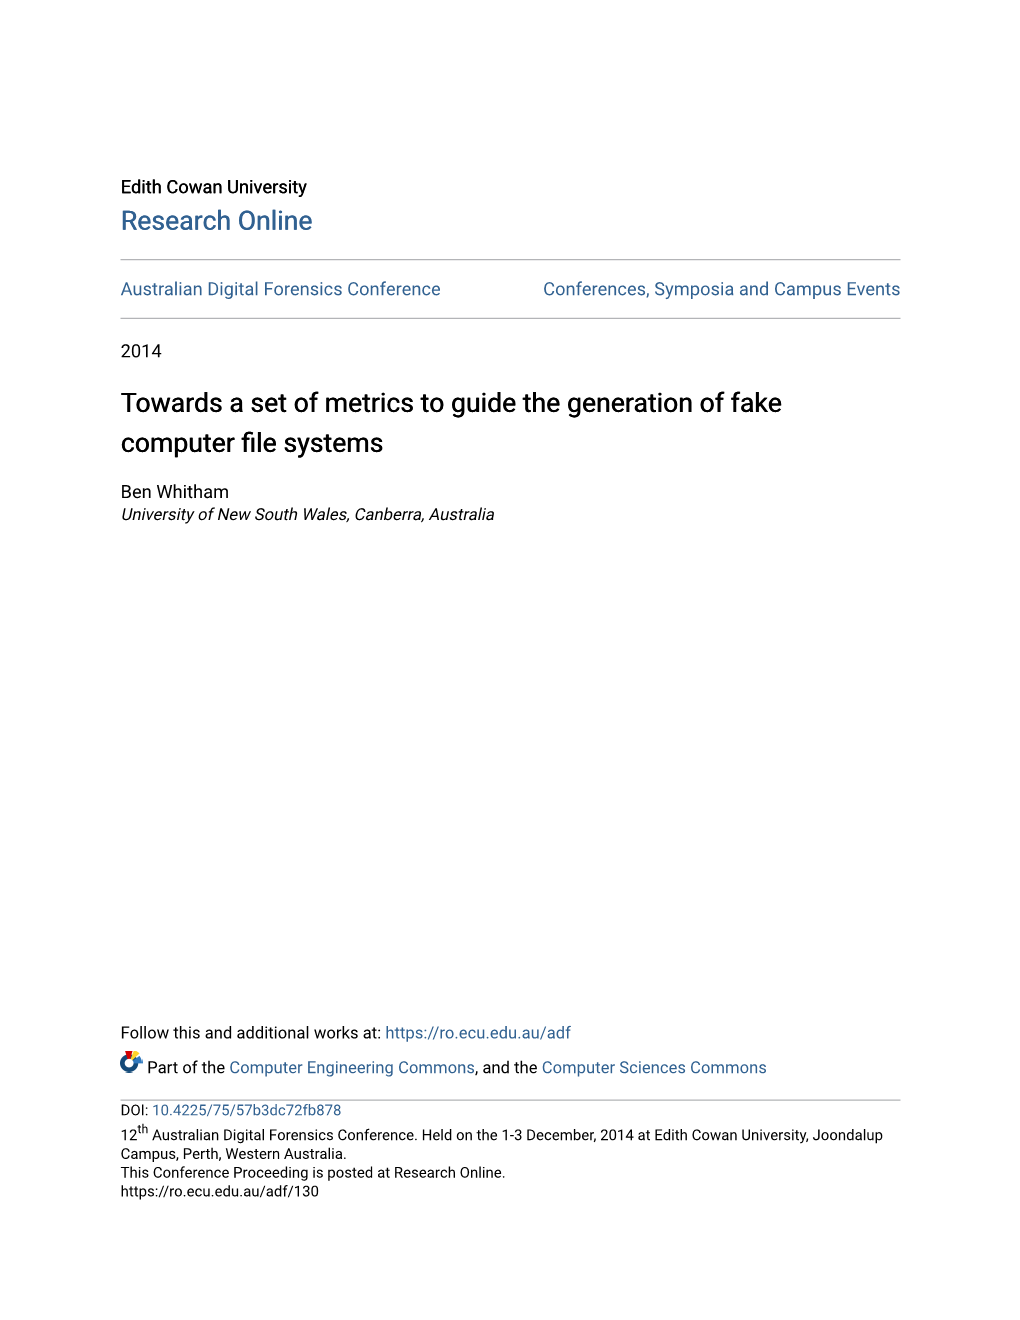 Towards a Set of Metrics to Guide the Generation of Fake Computer File Systems